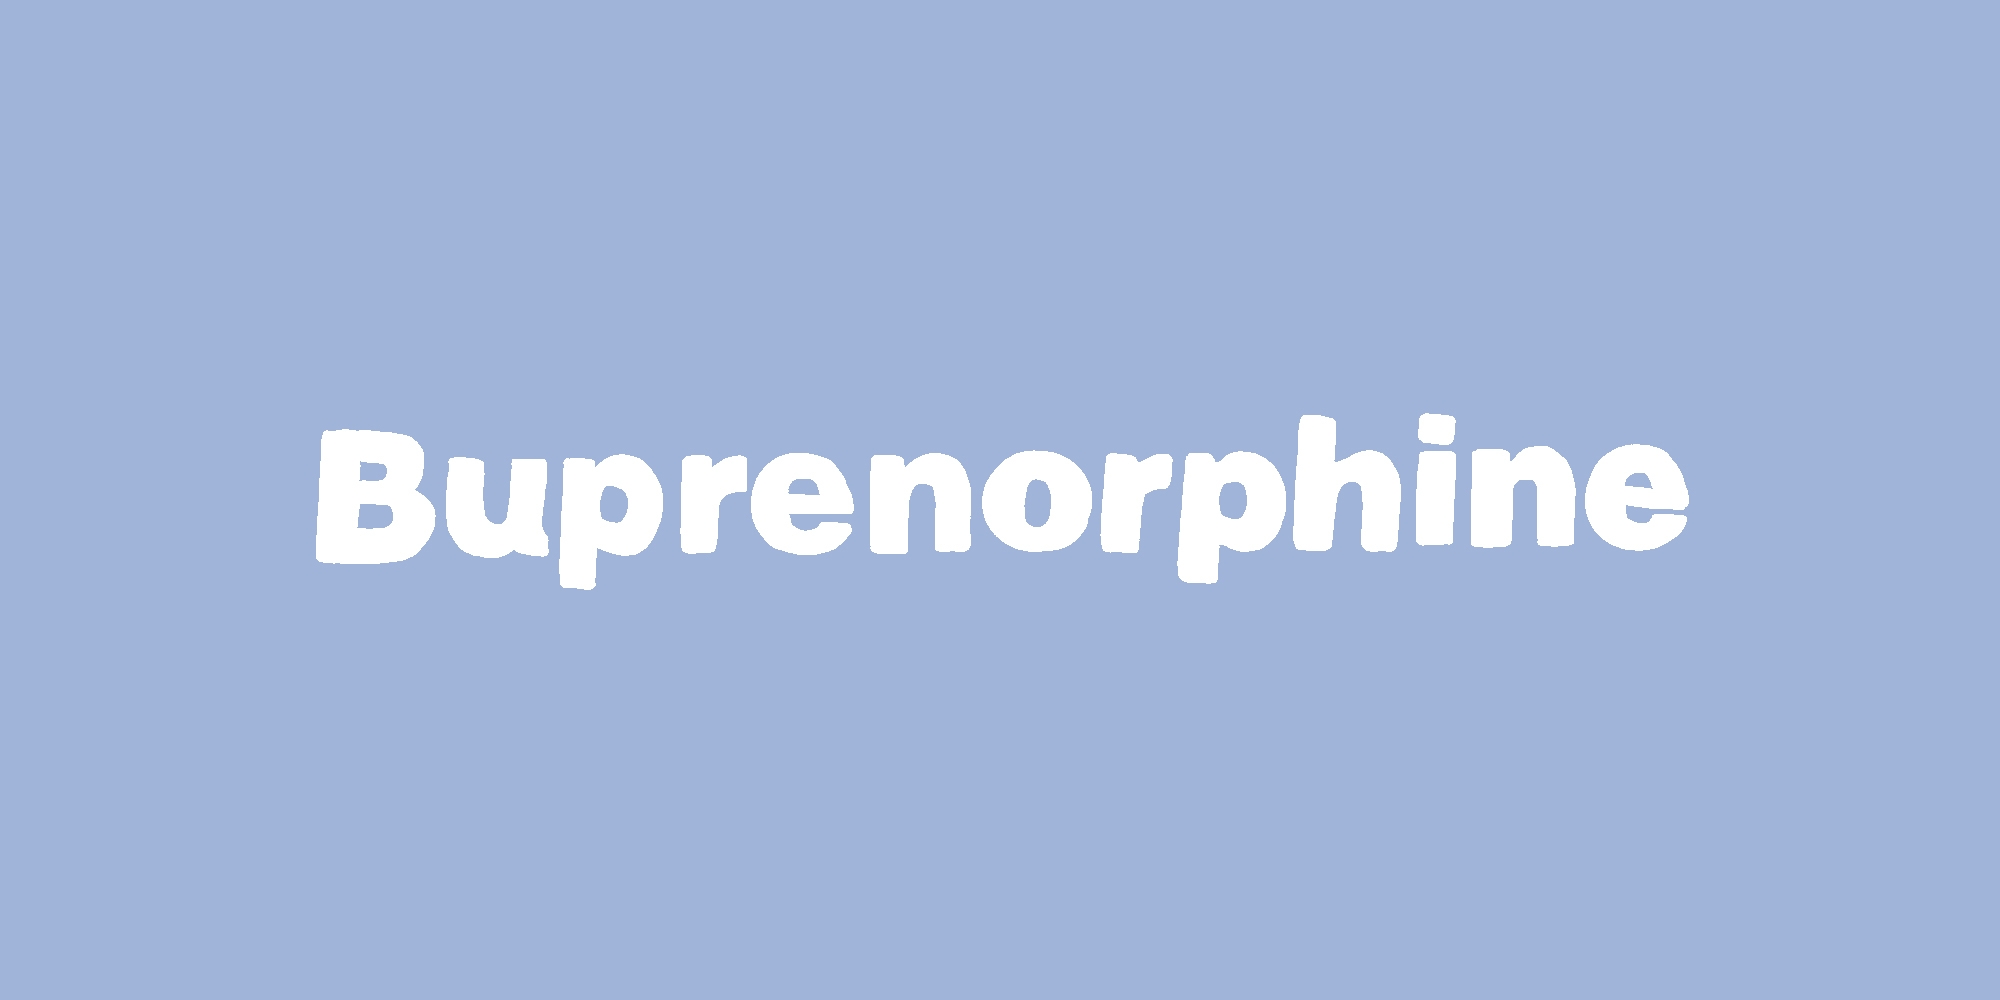 The word "Buprenorphine" on a blue background